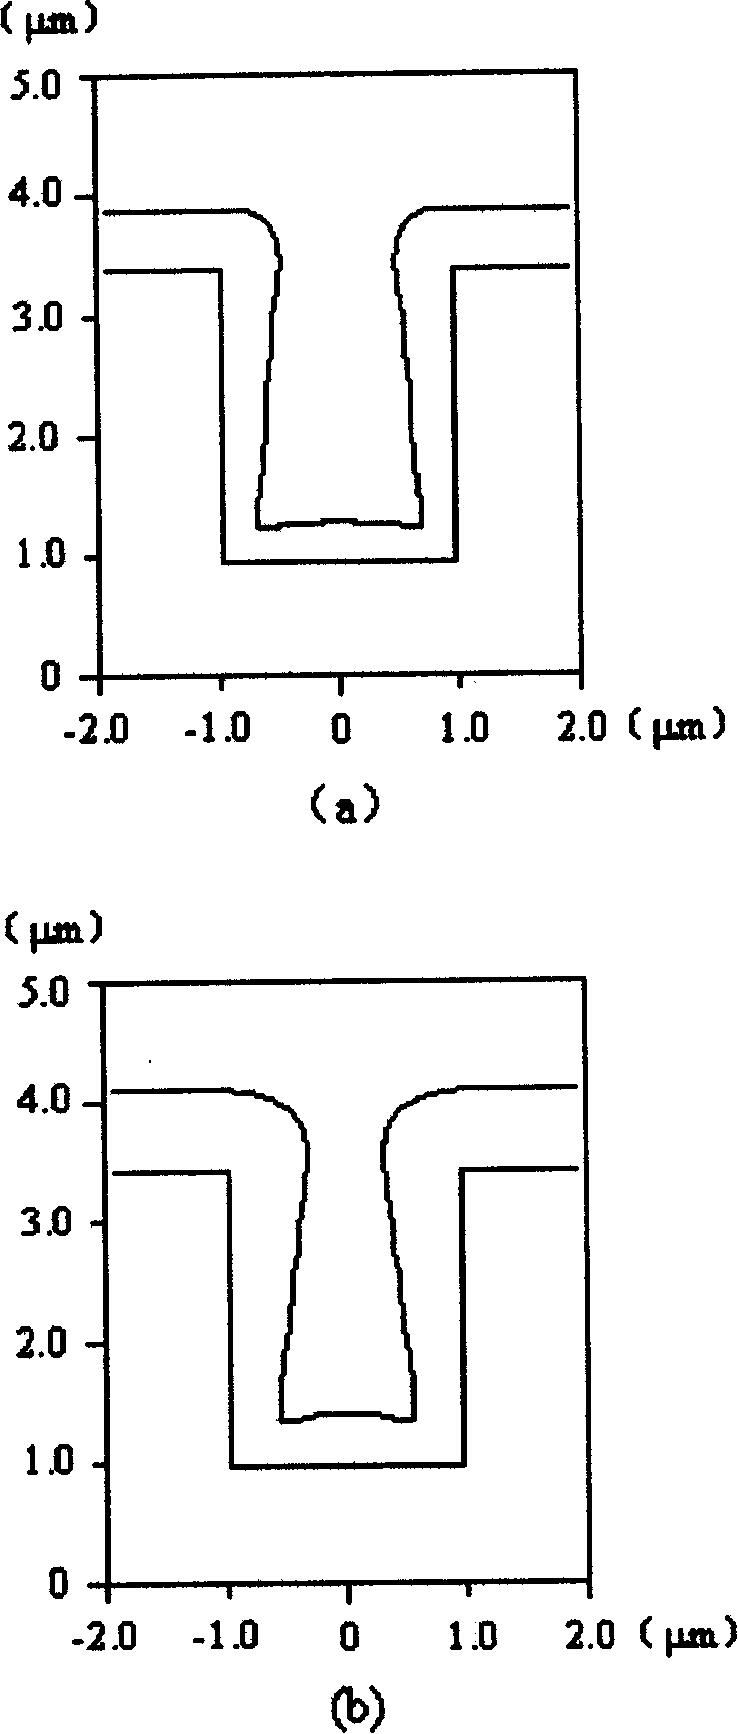 Elementary cell automation machine coupling method for thin film boundary and deposition rate calculation